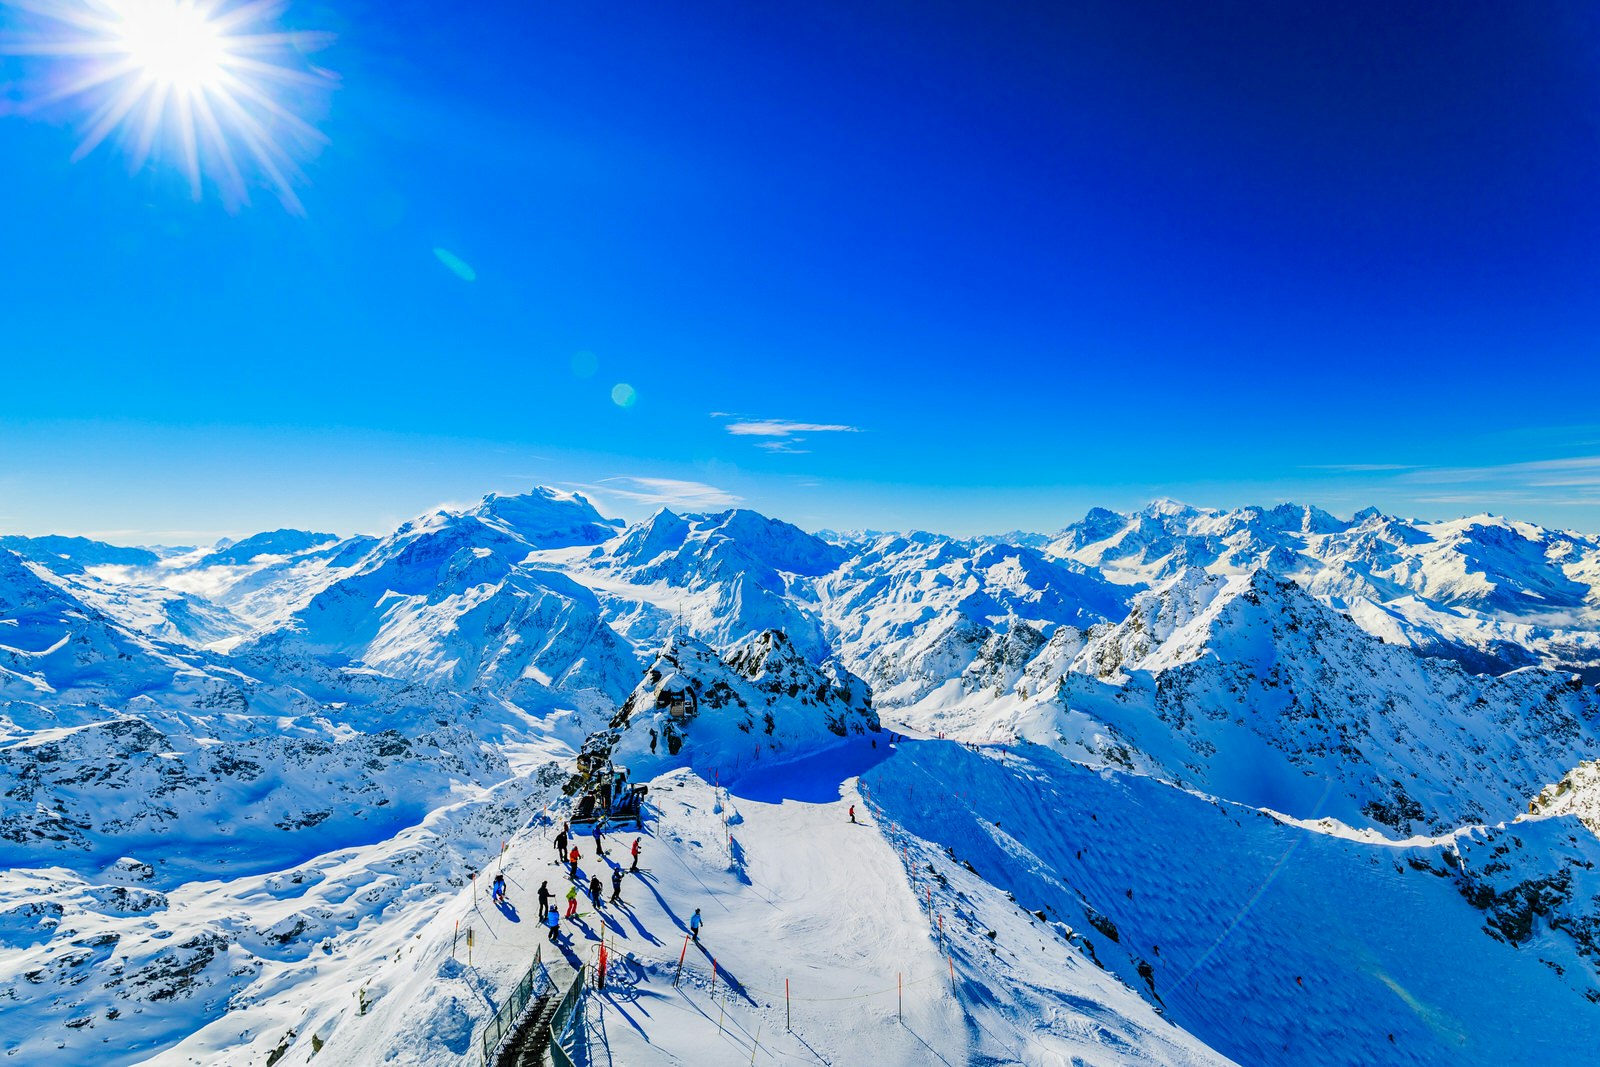 Shot from the summit of Mont Fort, this image shows a horizon full of snow-covered peaks under an incredibly dark blue sky